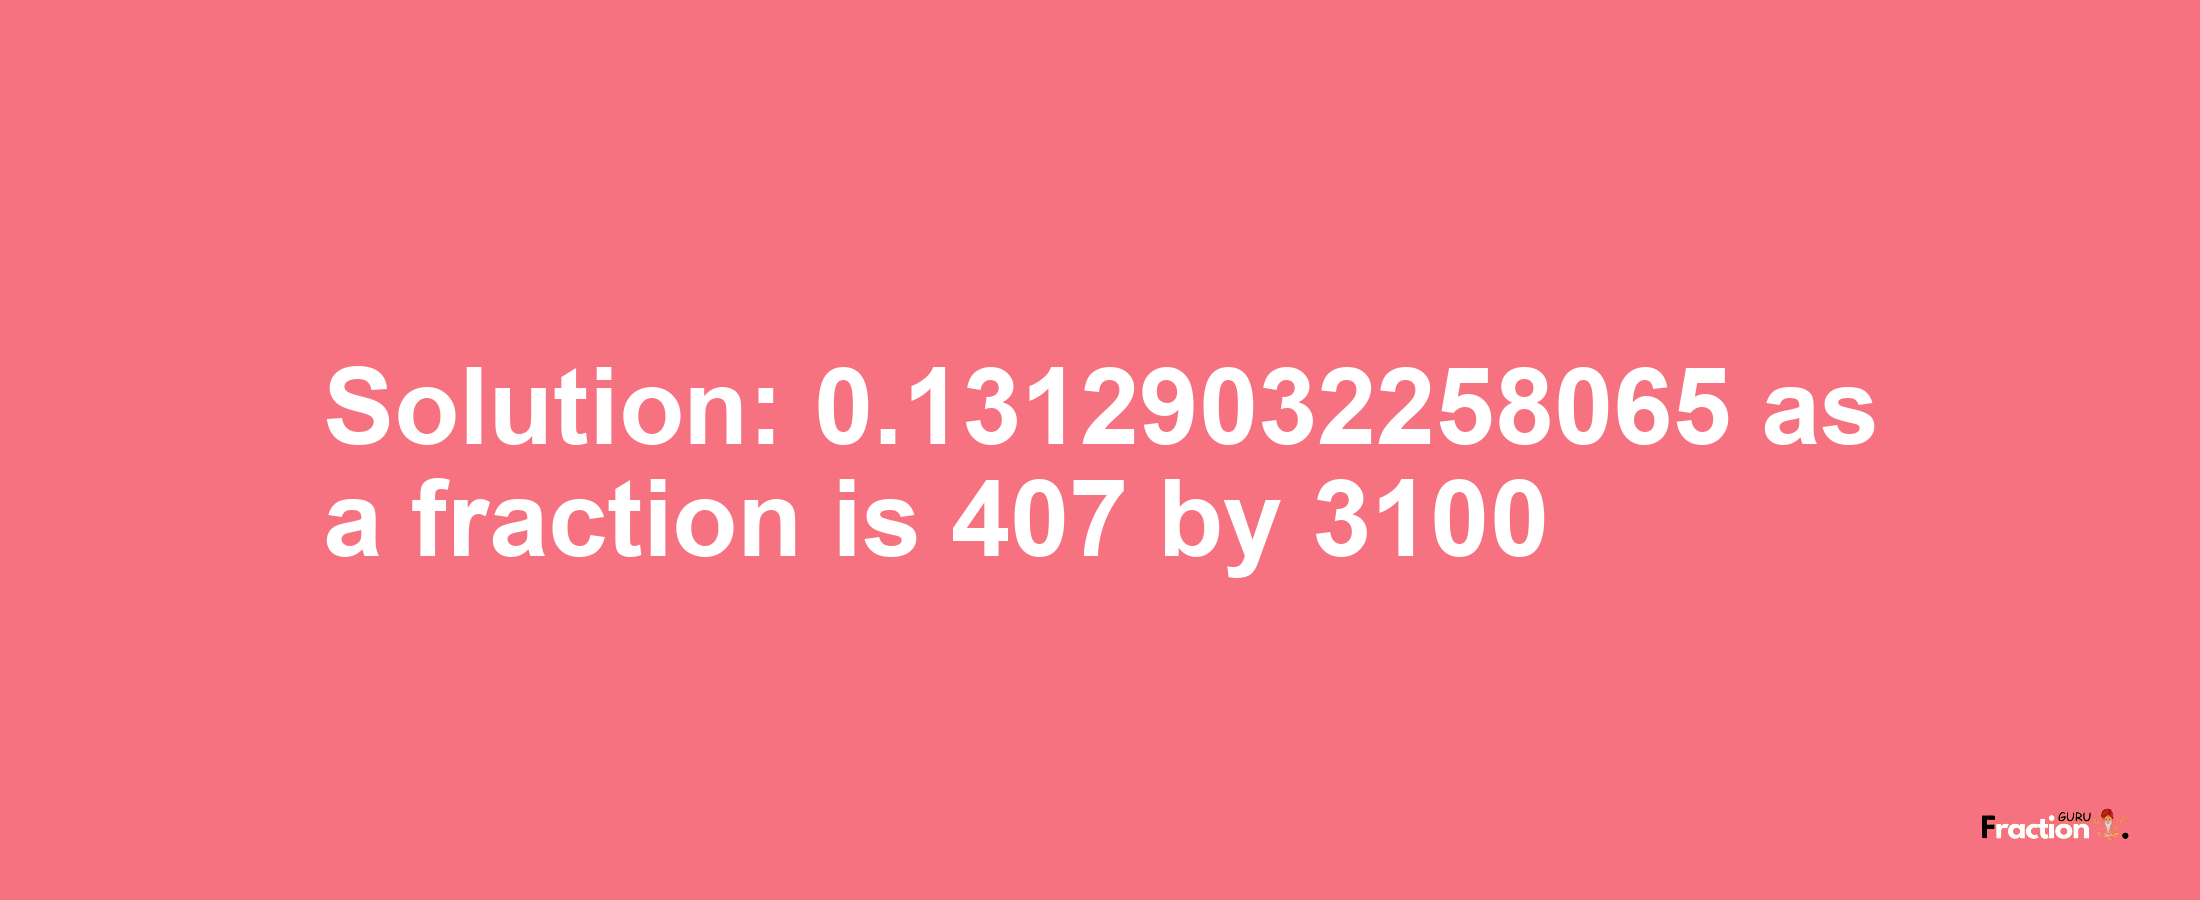 Solution:0.13129032258065 as a fraction is 407/3100